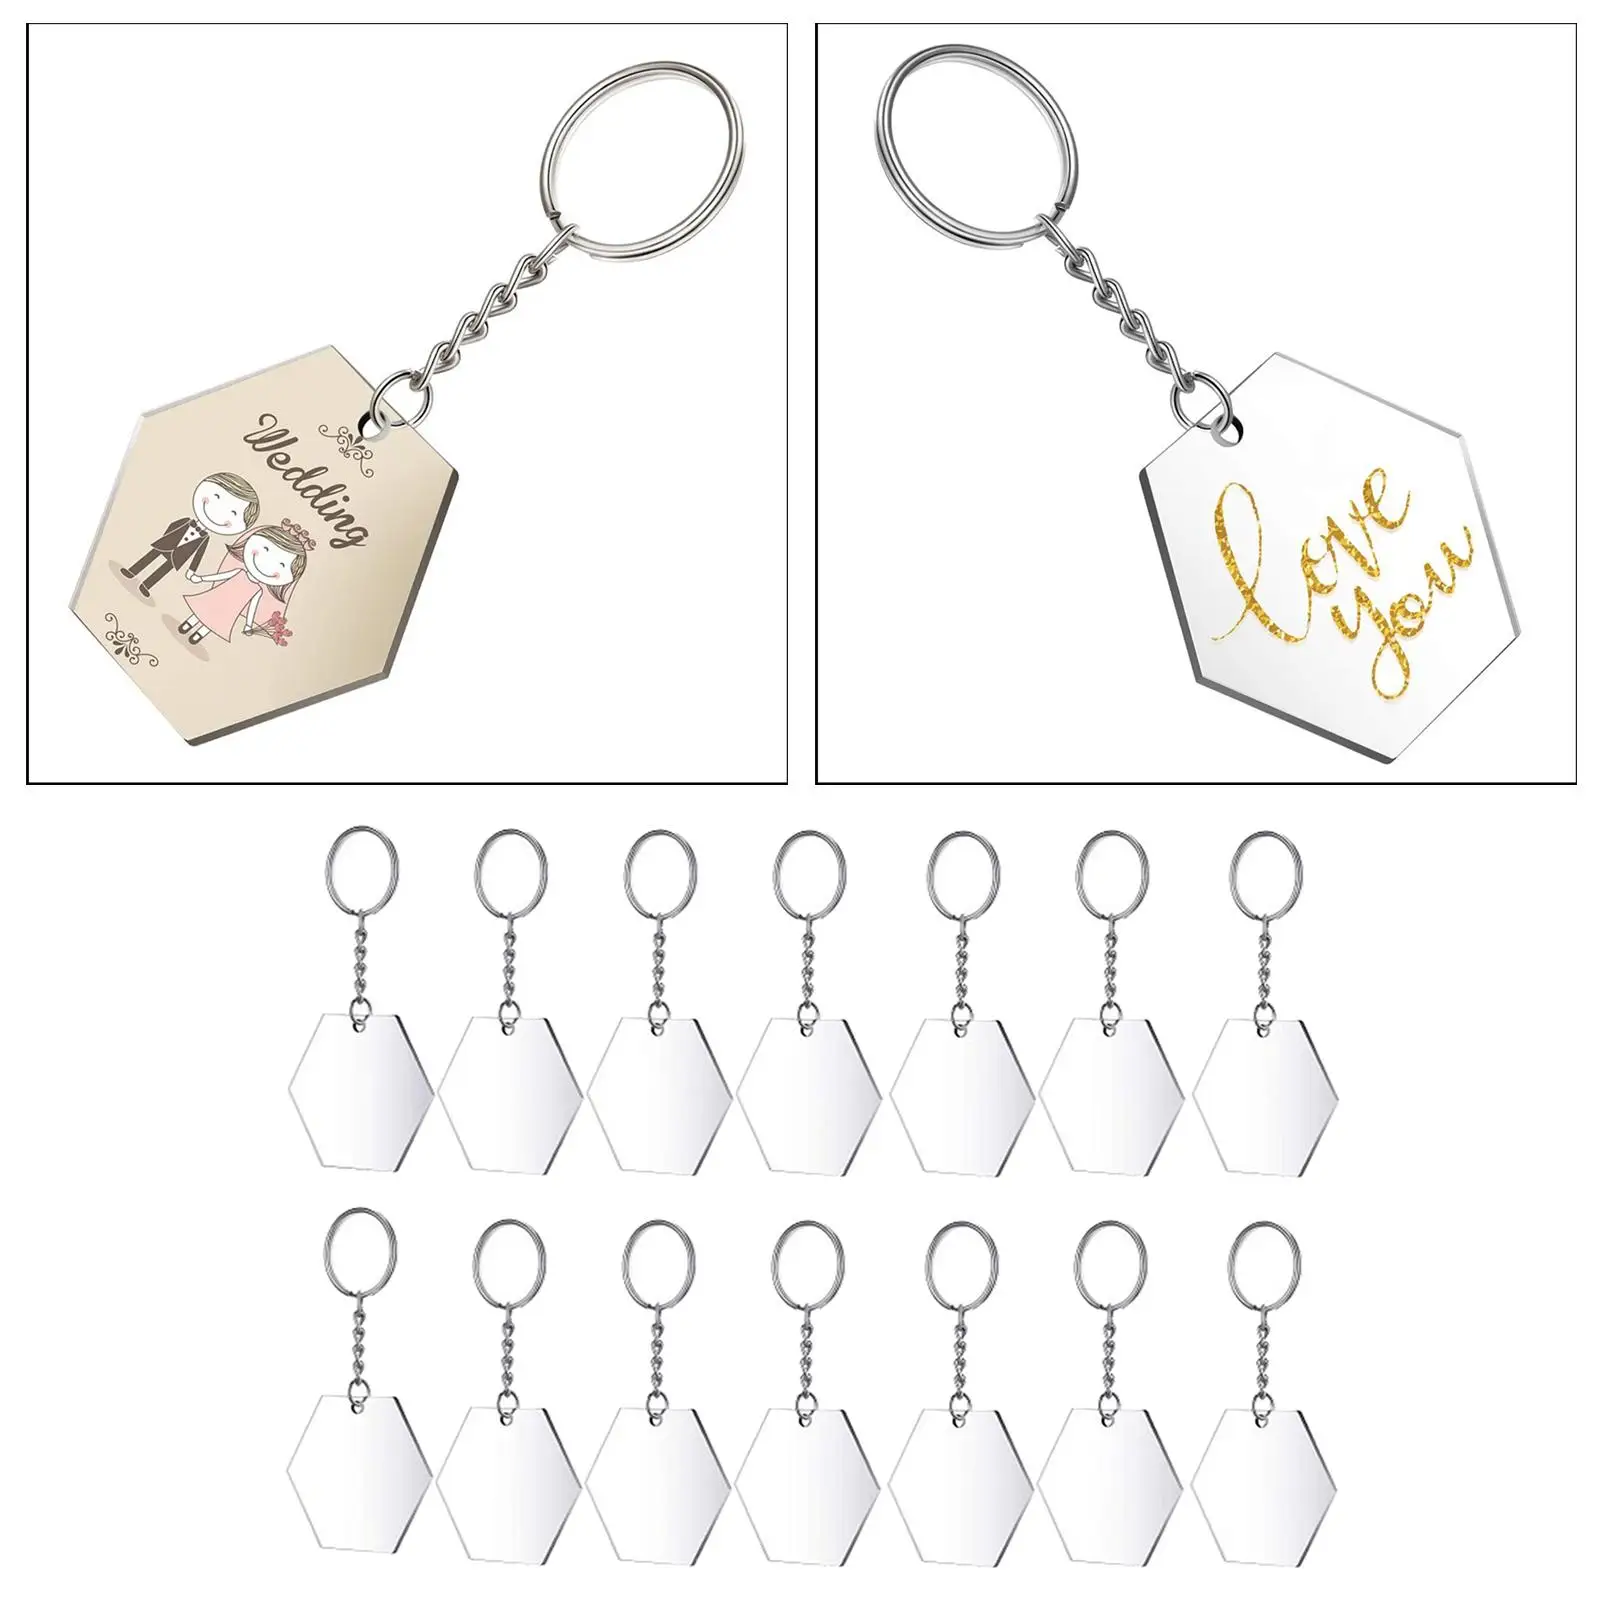 24 Sets Acrylic Keychain , Transparent Hexagon Pendant Chains and Keychain Pendant for DIY Key Rings